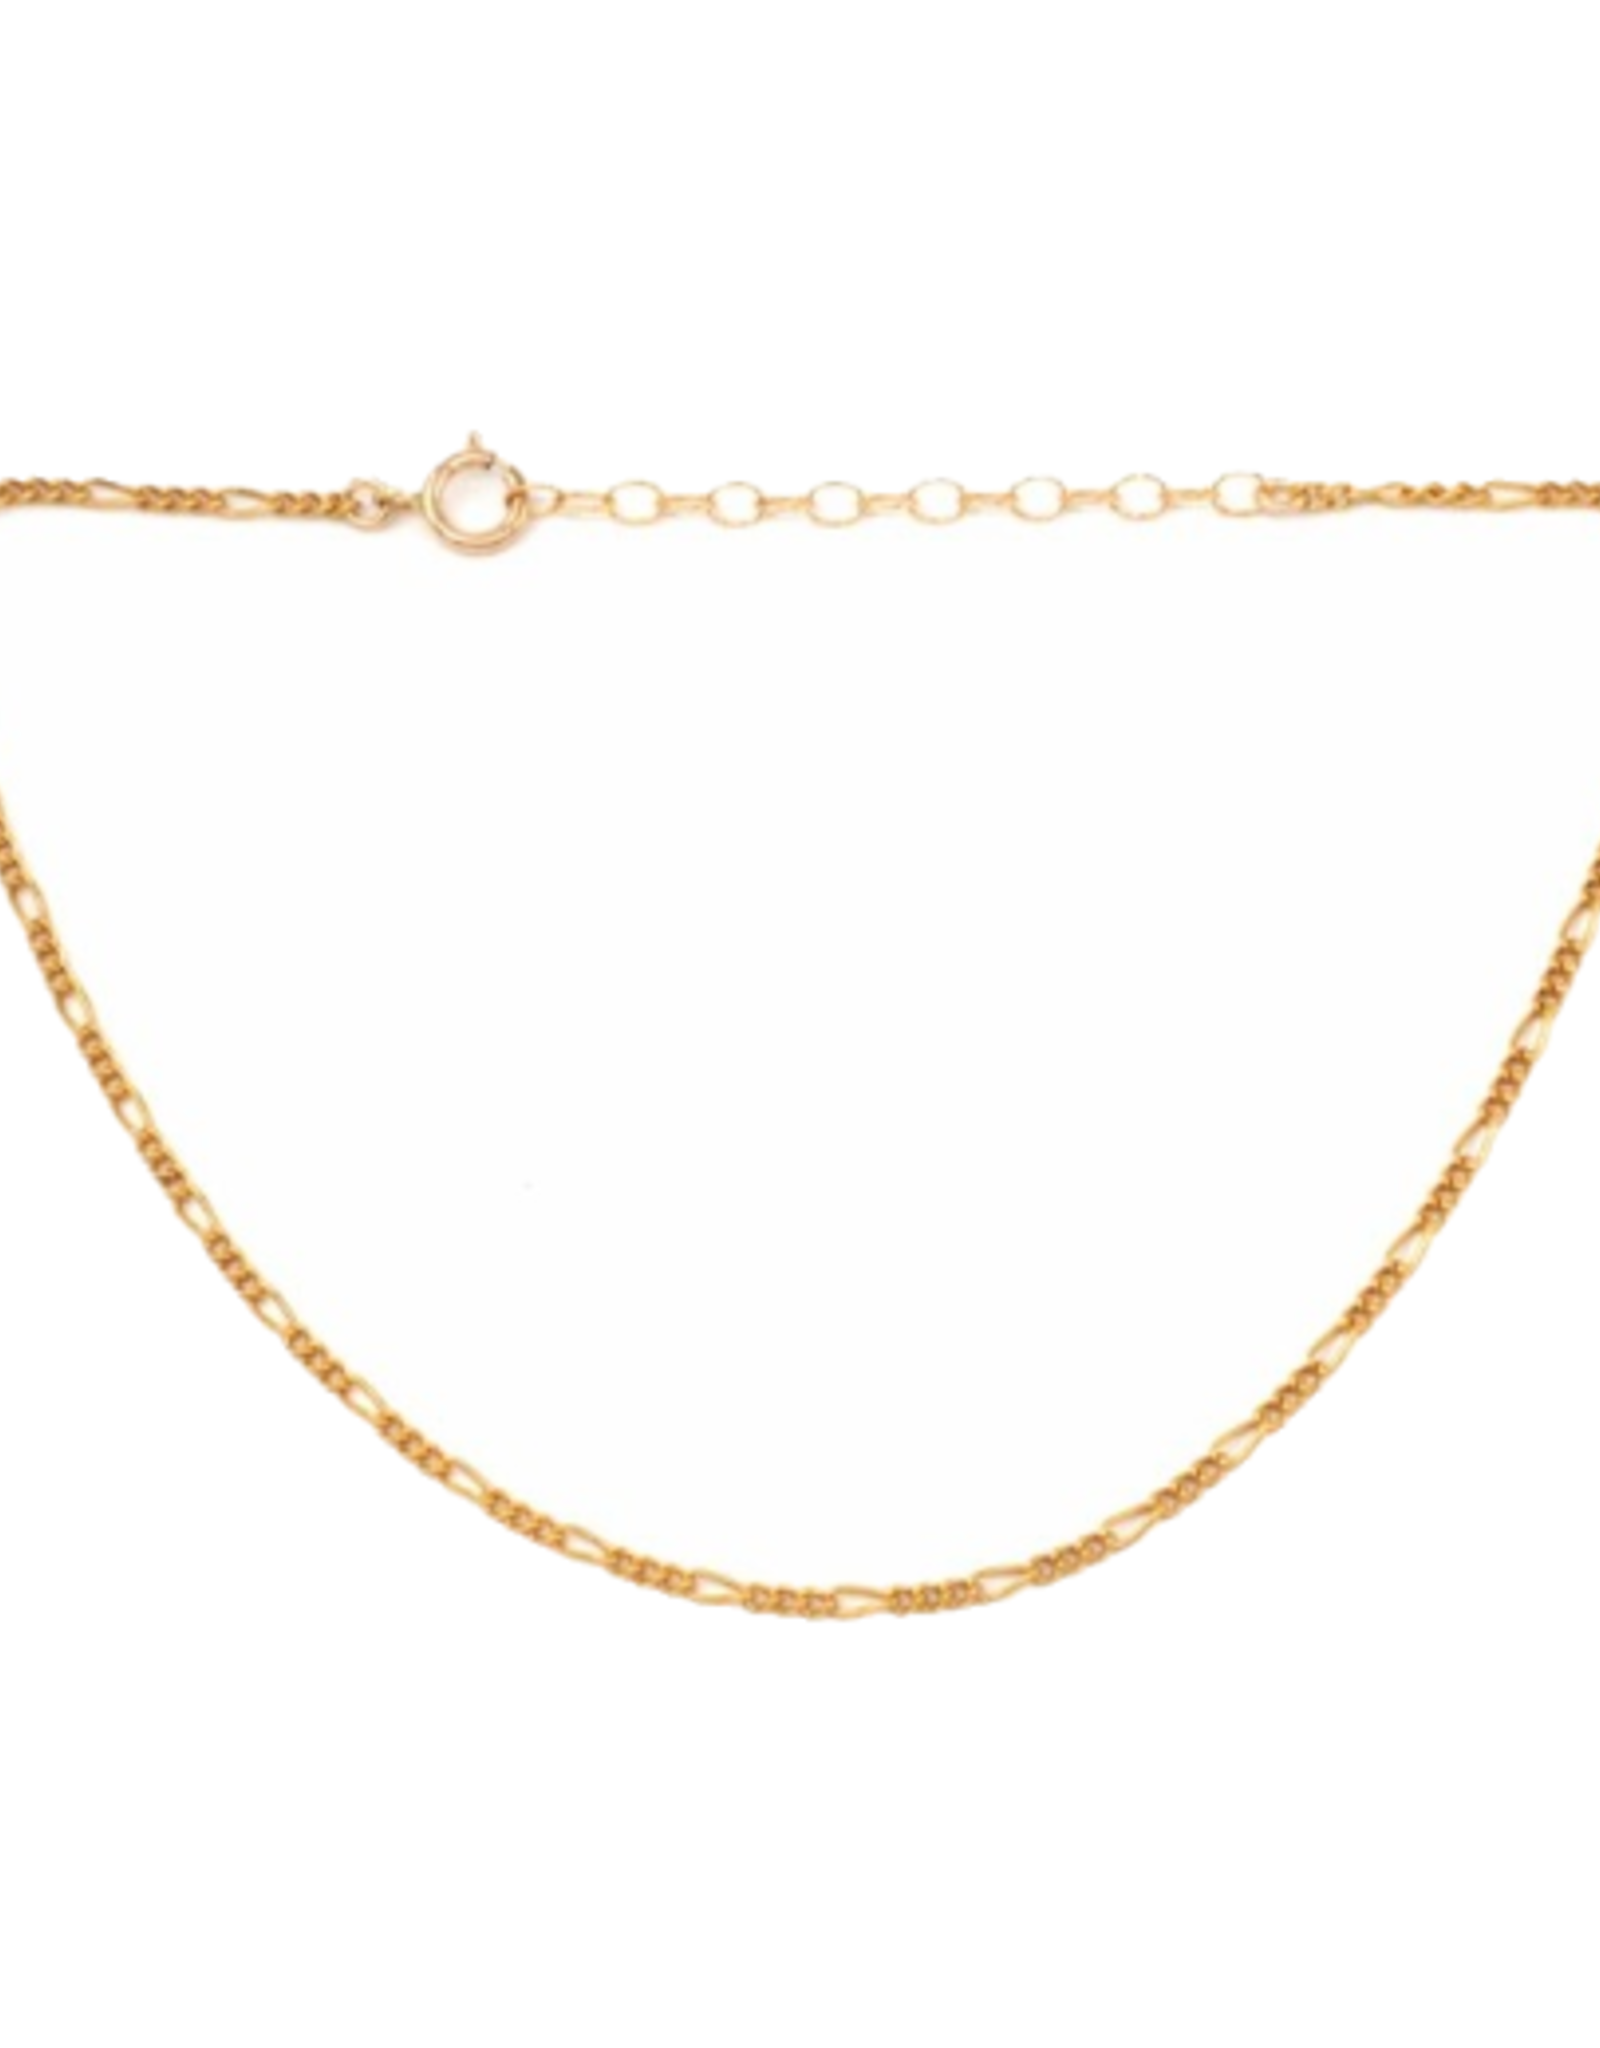 Anklet Figaro Chain Link Gold Fill